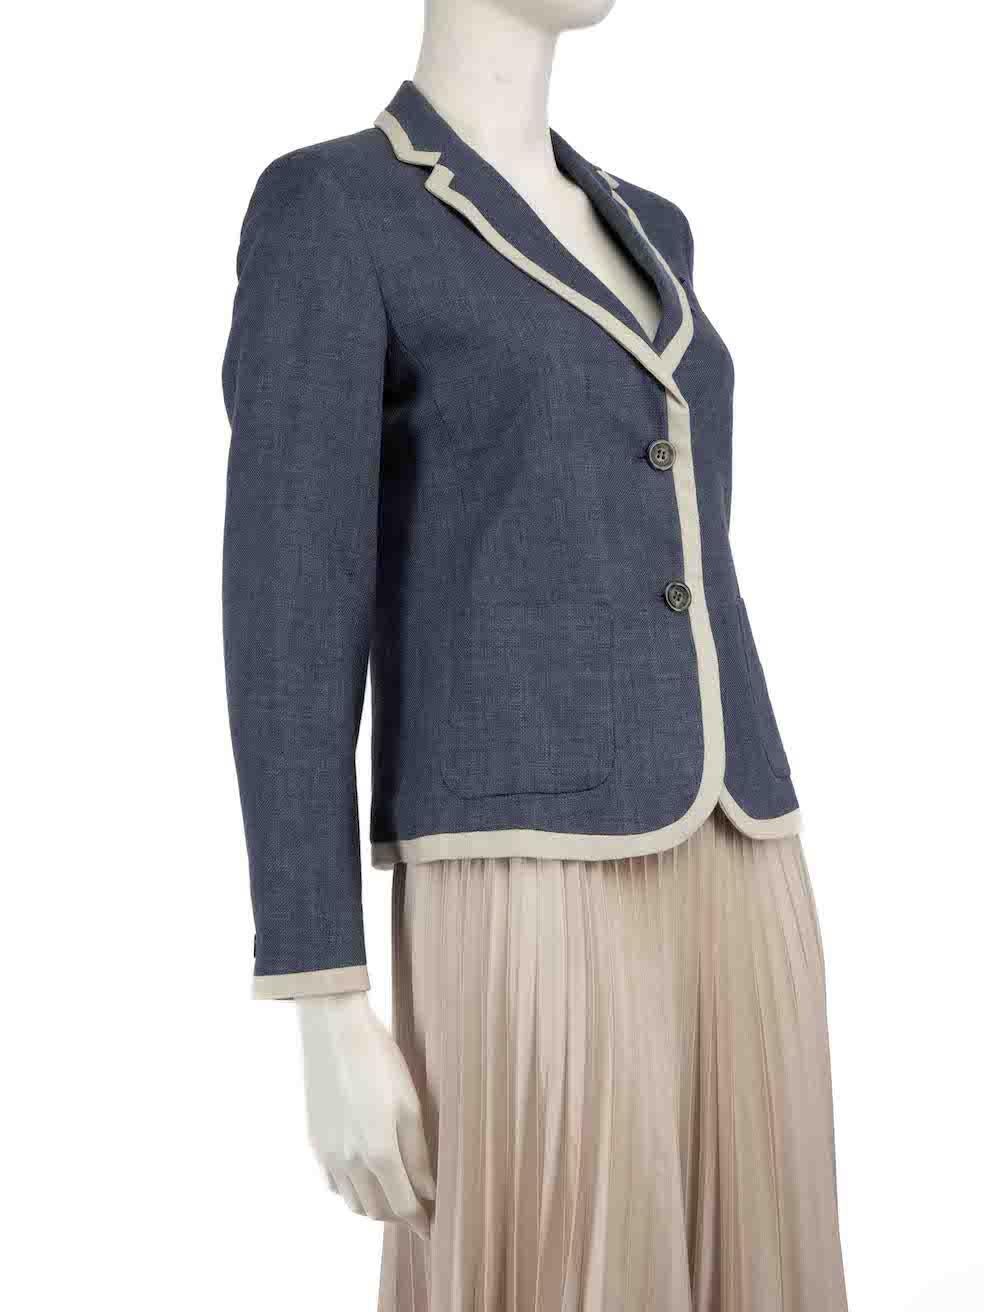 CONDITION is Very good. Minimal wear to blazer is evident. Minimal wear to the contrasting trim and sleeve linings with discolouration to the fabric on this used Max Mara Weekend designer resale item.
 
 Details
 Blue
 Wool
 Blazer
 Grey contrast